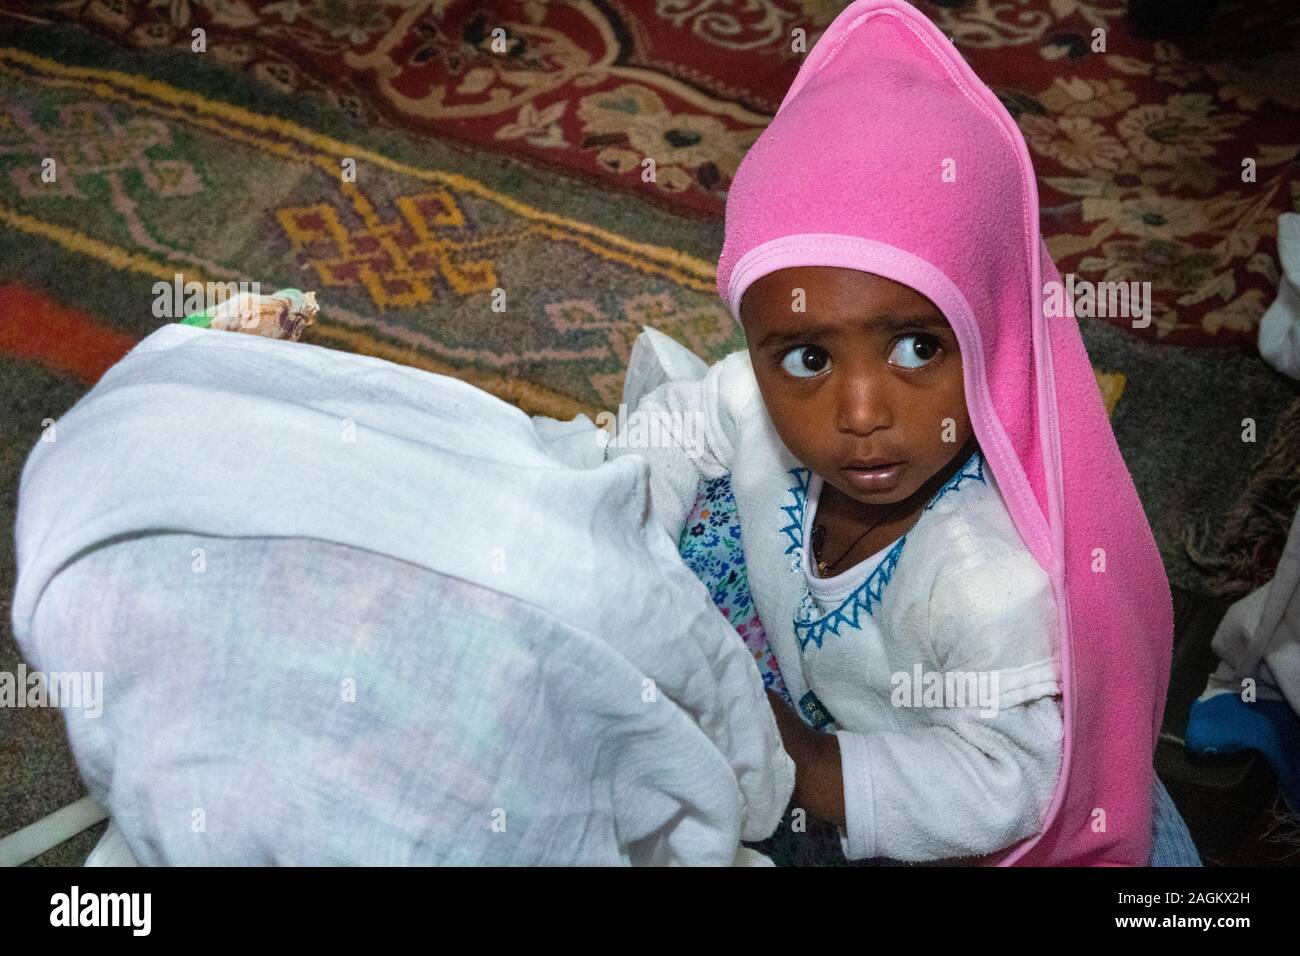 Ethiopia, Amhara Region, Lalibela, Bet Gabriel Rafael, worshipper holding young child in arms during mass Stock Photo